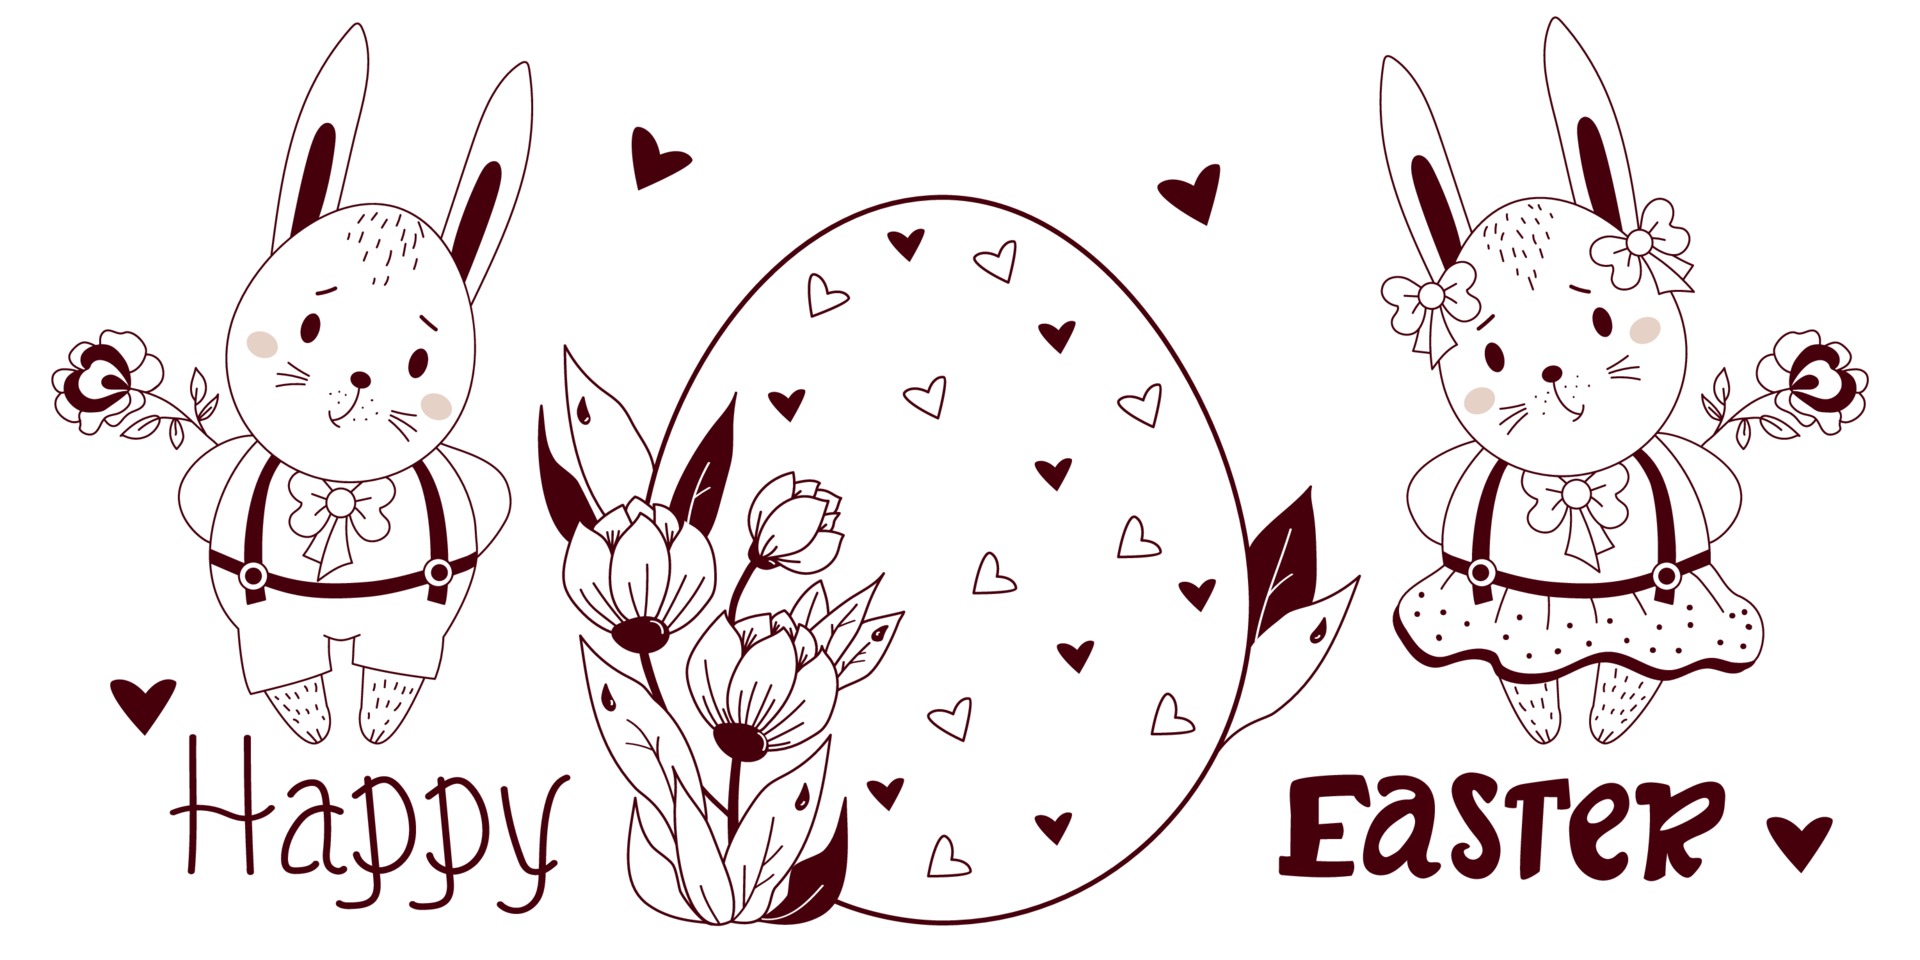 easter greeting cards to print